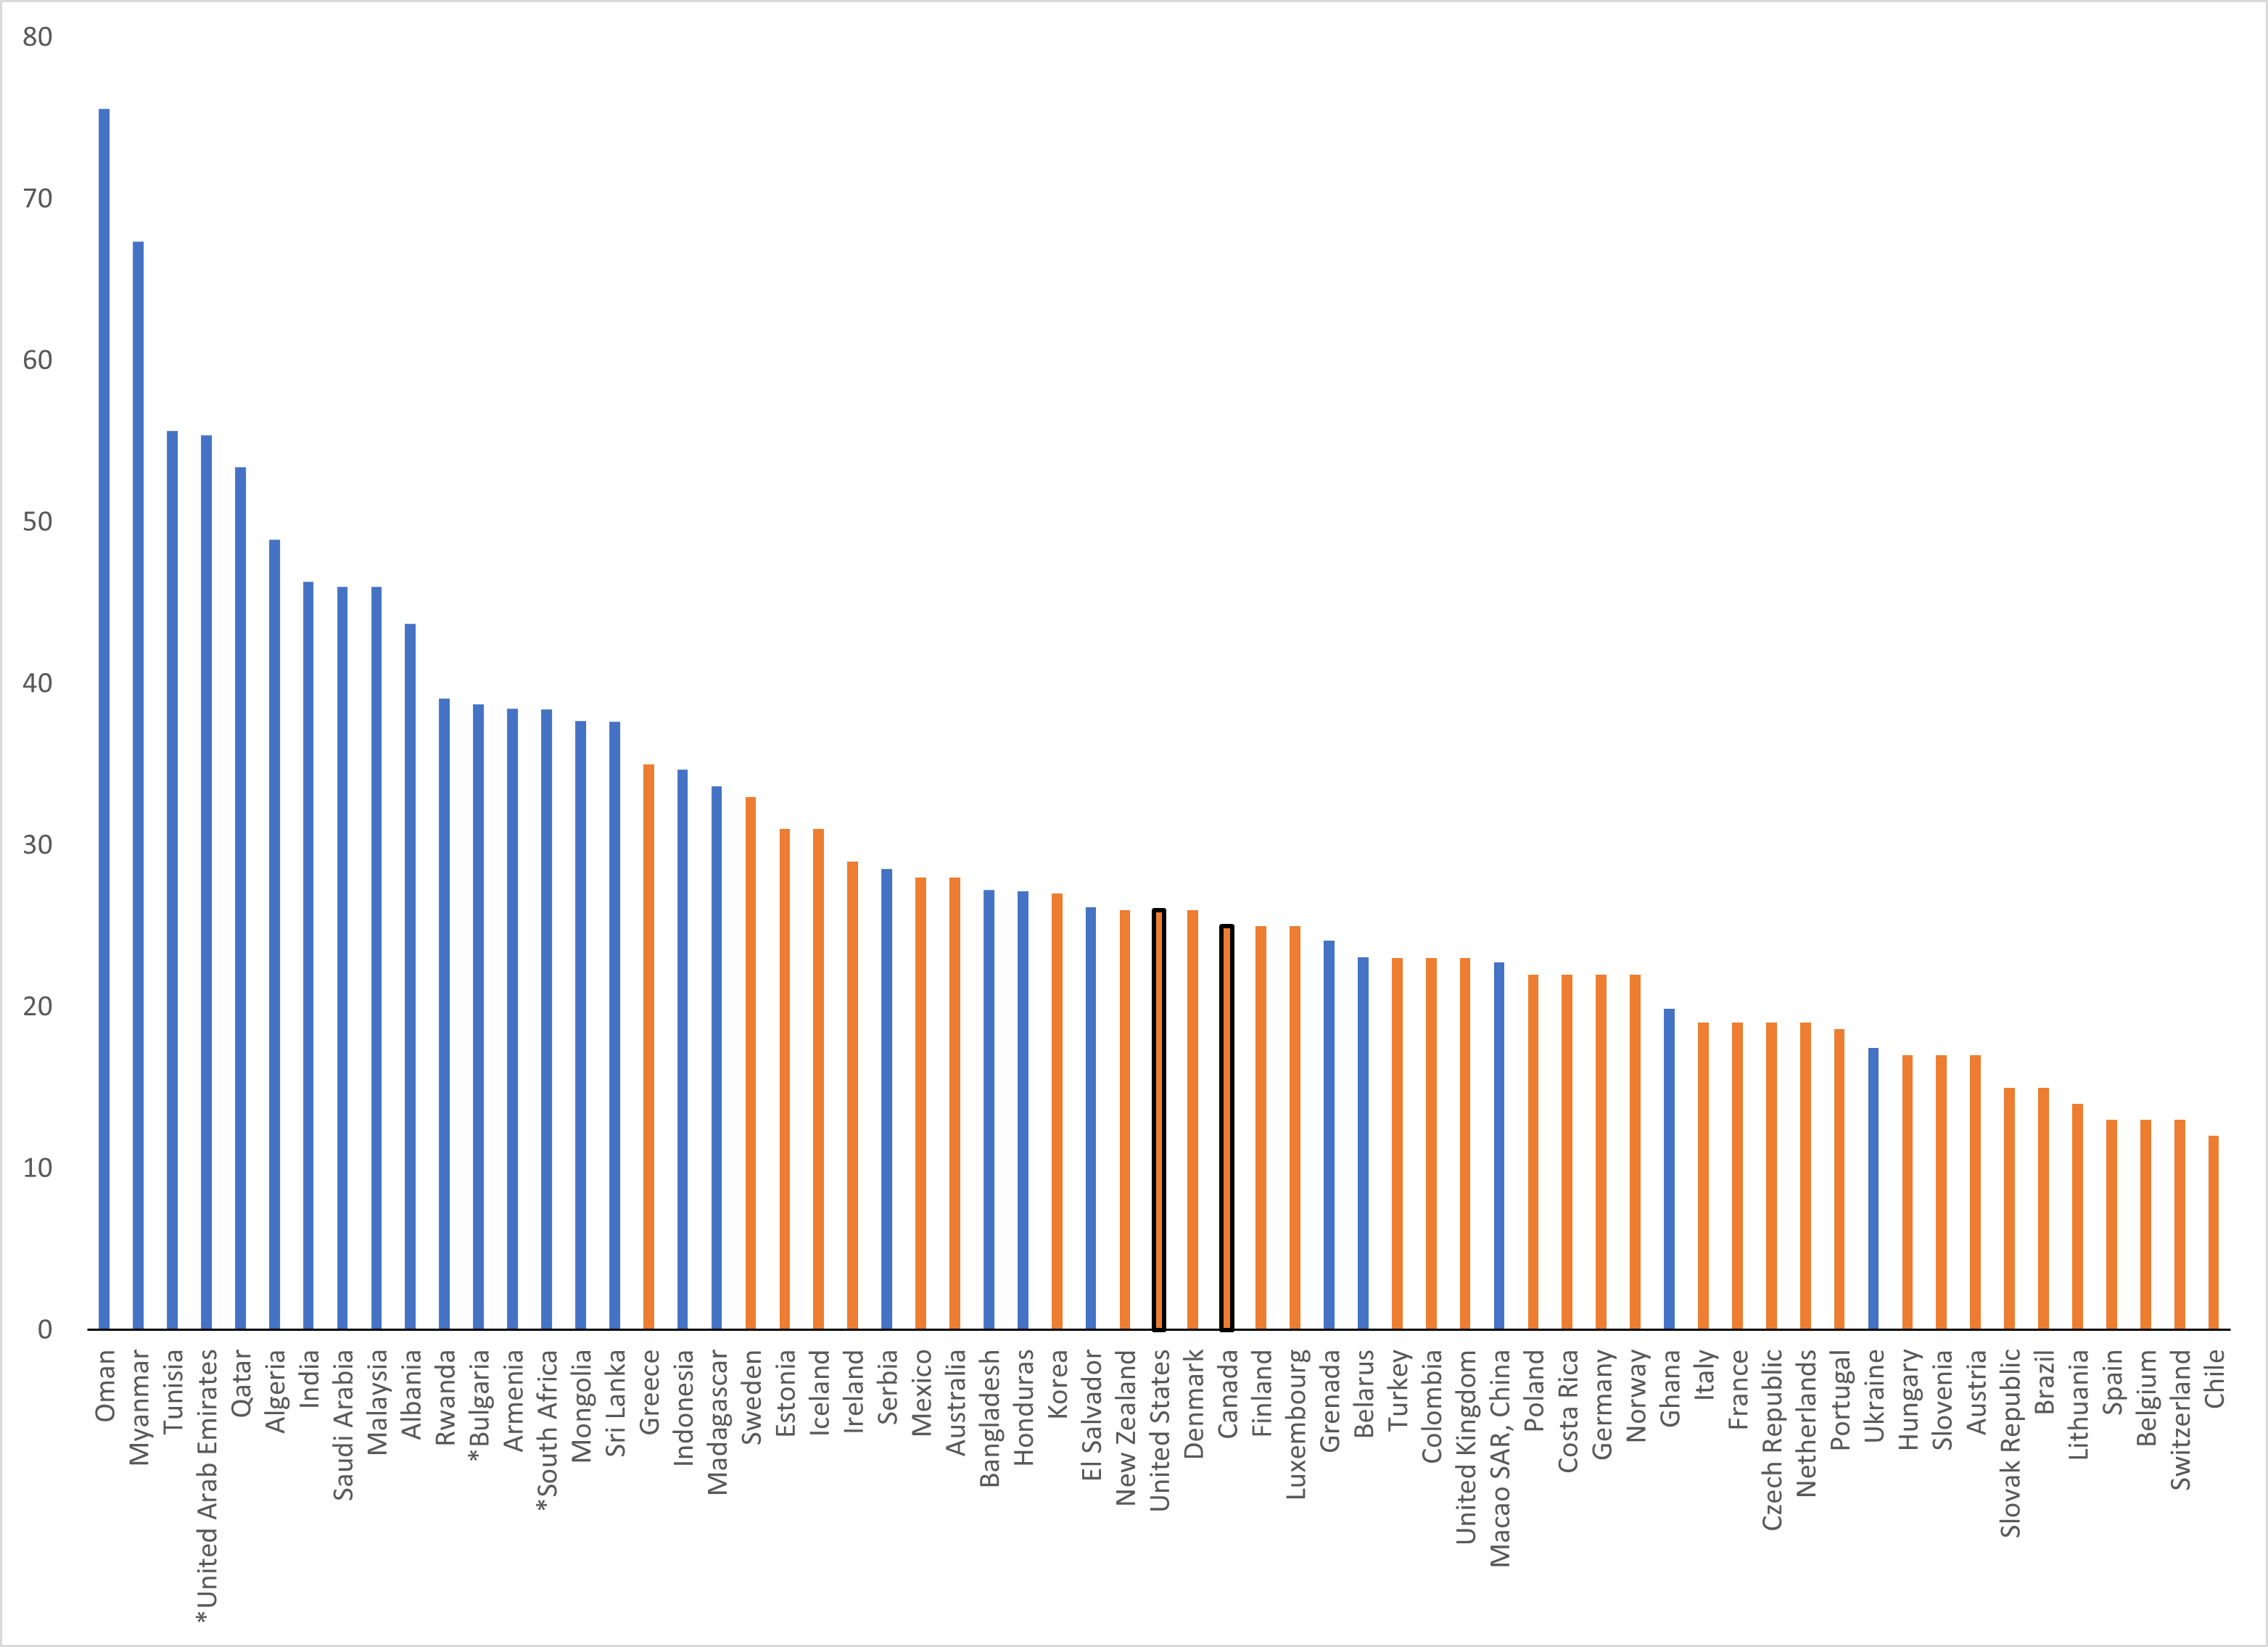  Undergraduate Information and Communication Technologies Degrees (% awarded to women) (Data for 2018 in blue, and data for 2021 in orange) (starred countries represent data from 2017)- download a larger version of this figure 